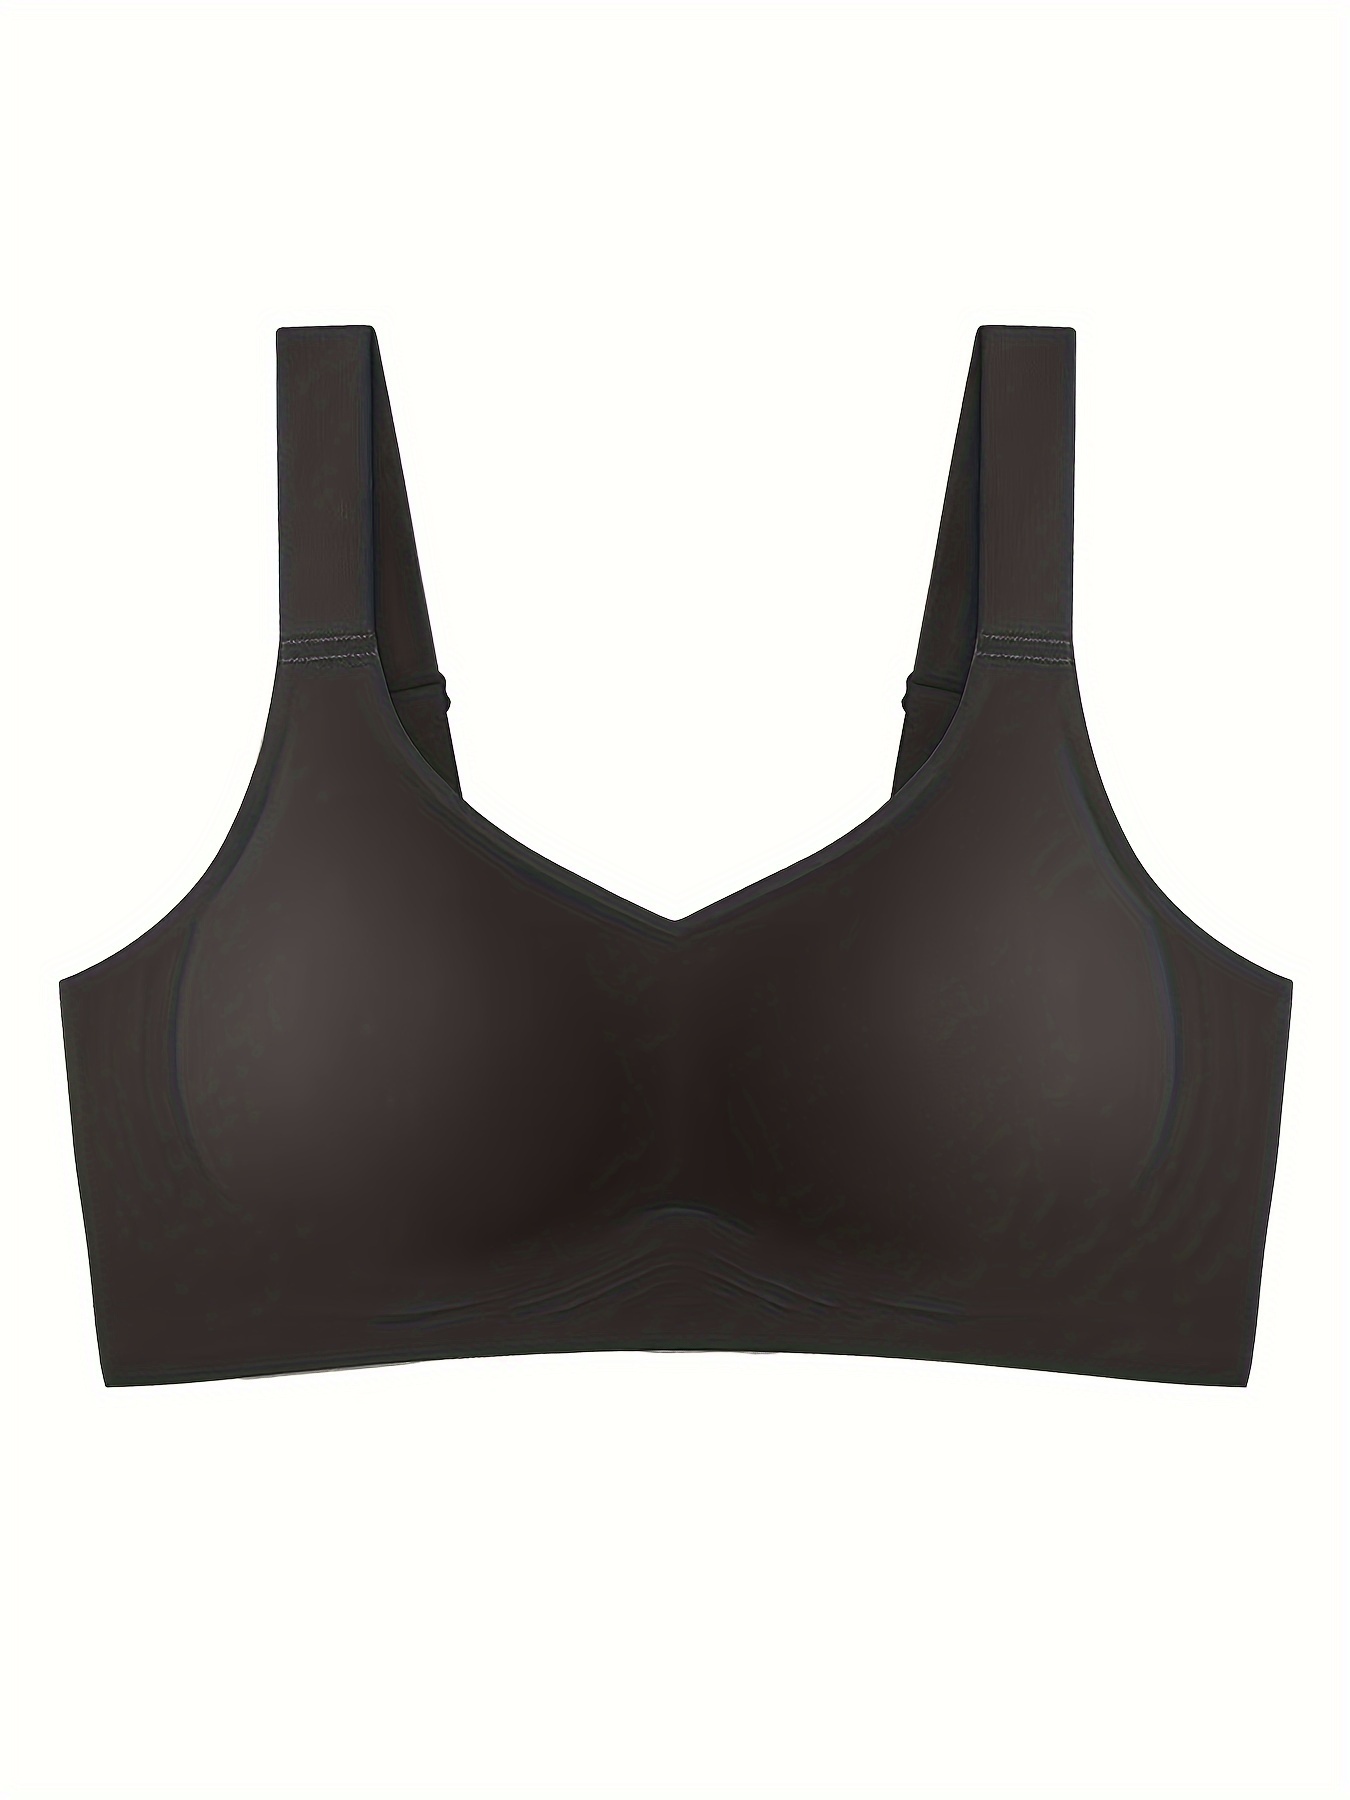 Women's Comfortable Thin Padless Sports Bras, Single Layer Solid